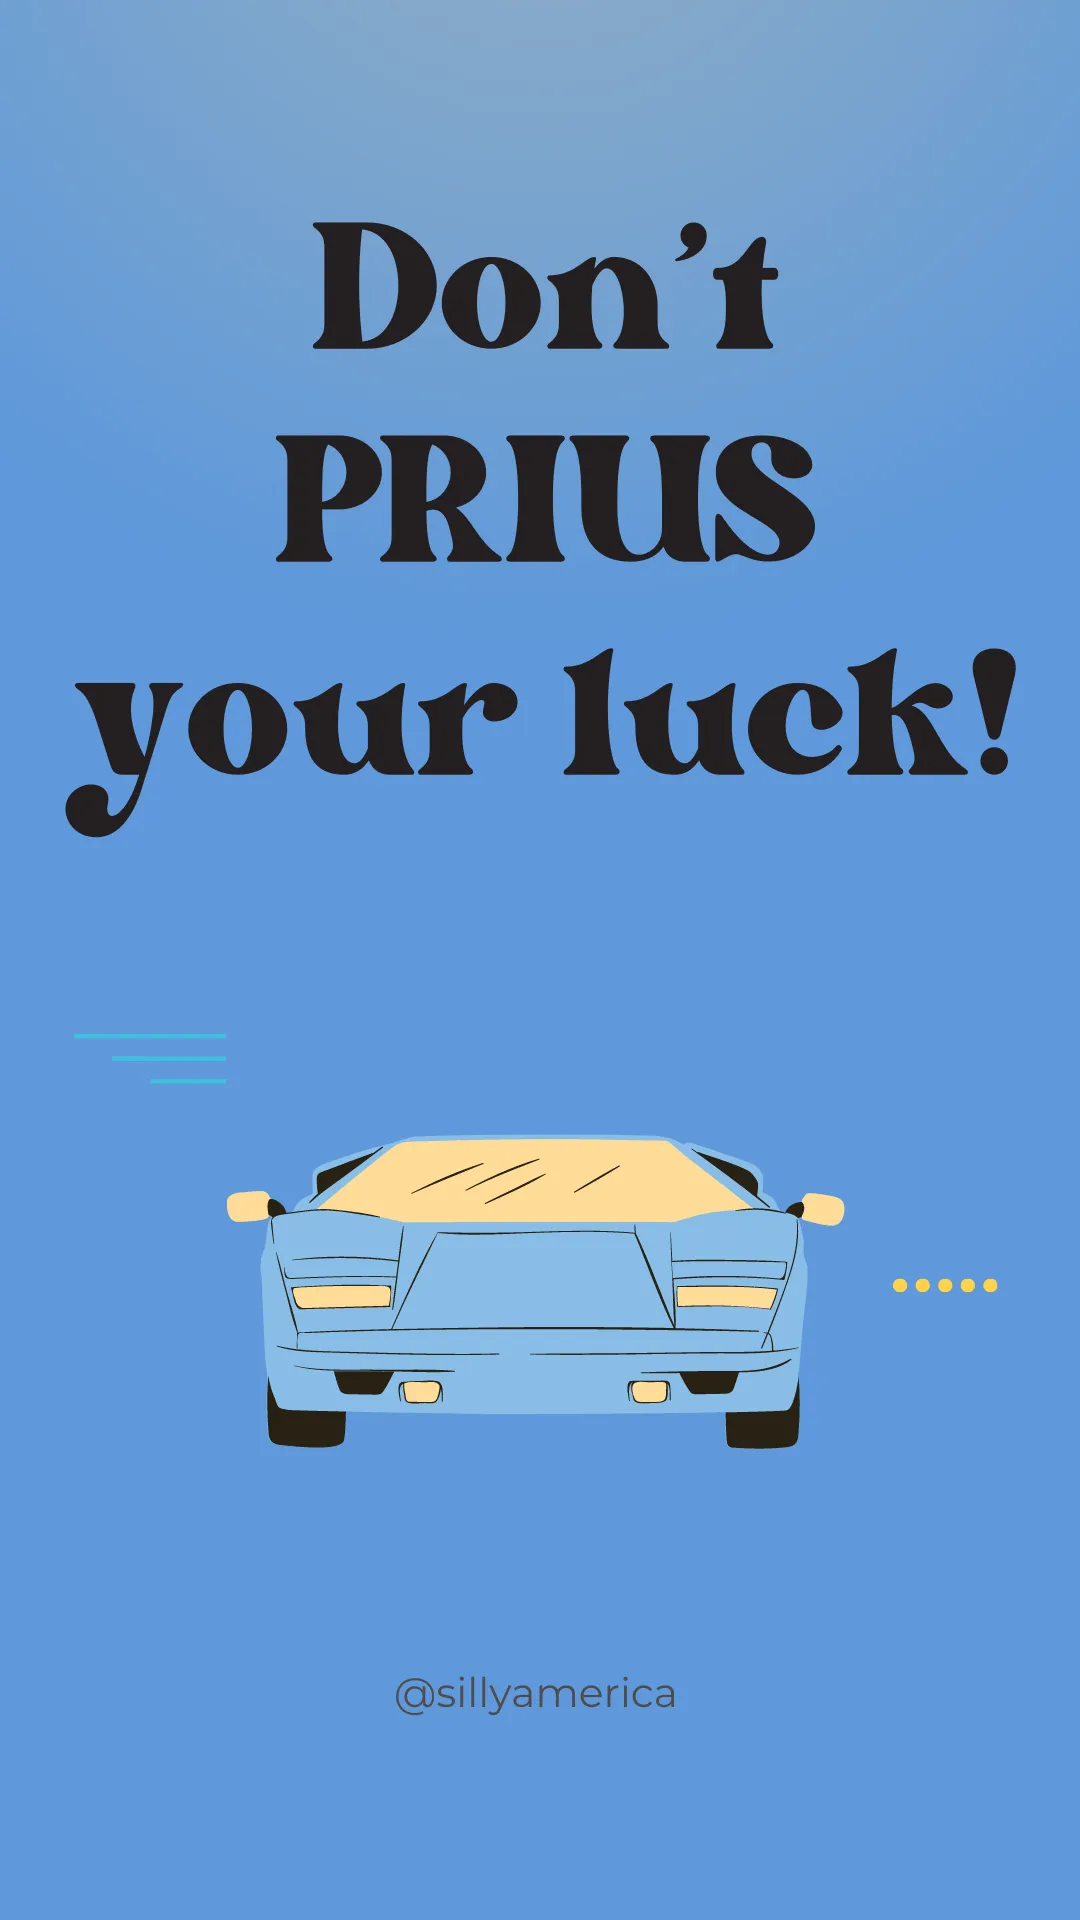 Don’t PRIUS your luck! - Road Trip Puns